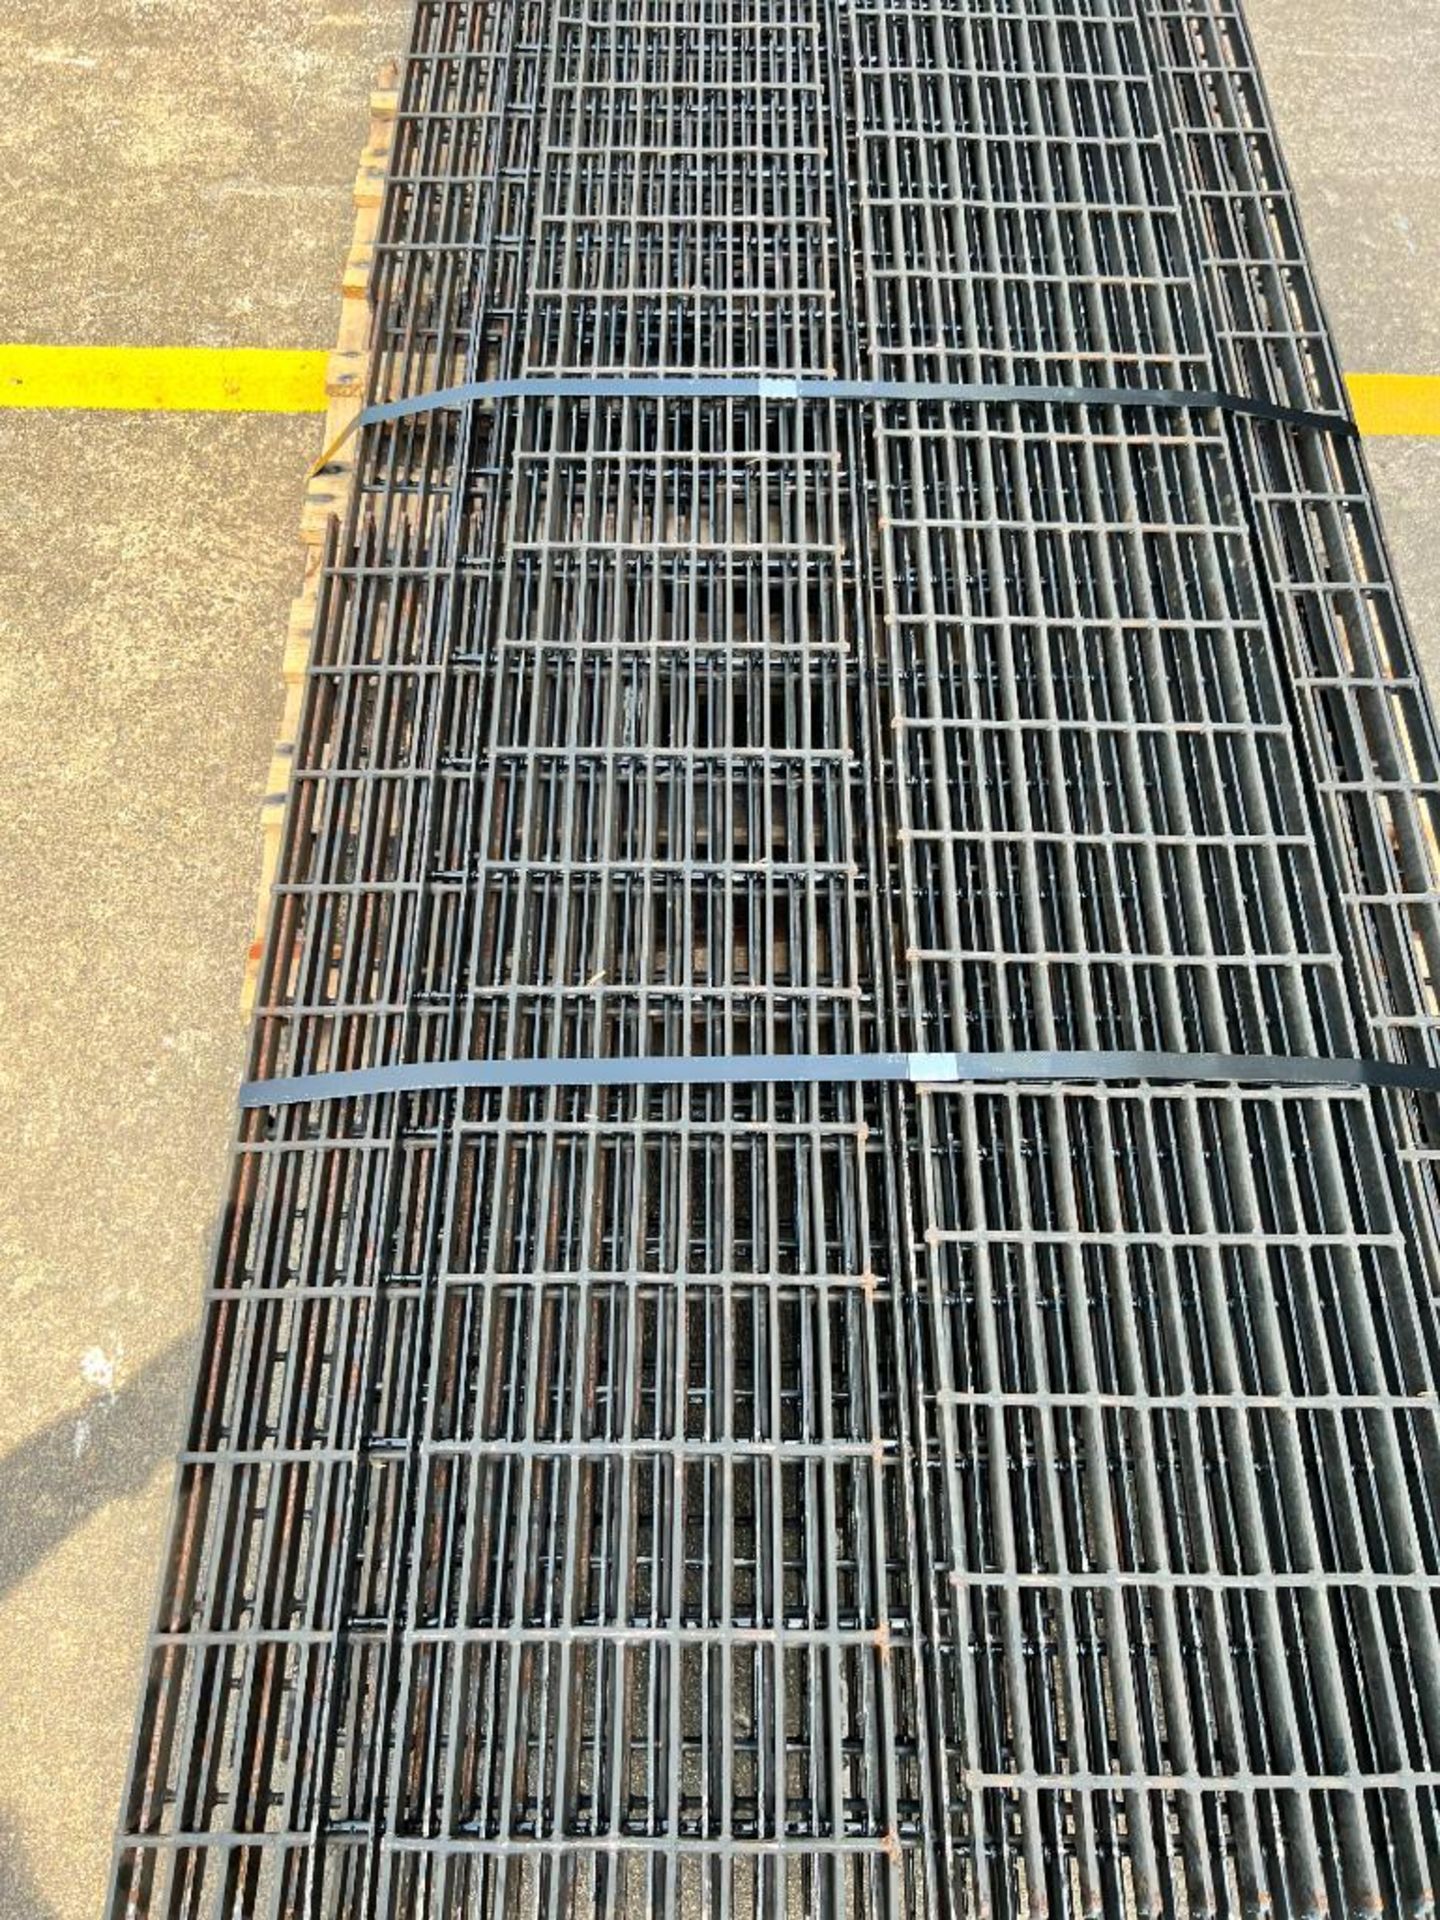 Metal Grates in Assorted Sizes ($50 Loading fee will be added to buyers invoice) - Image 3 of 3